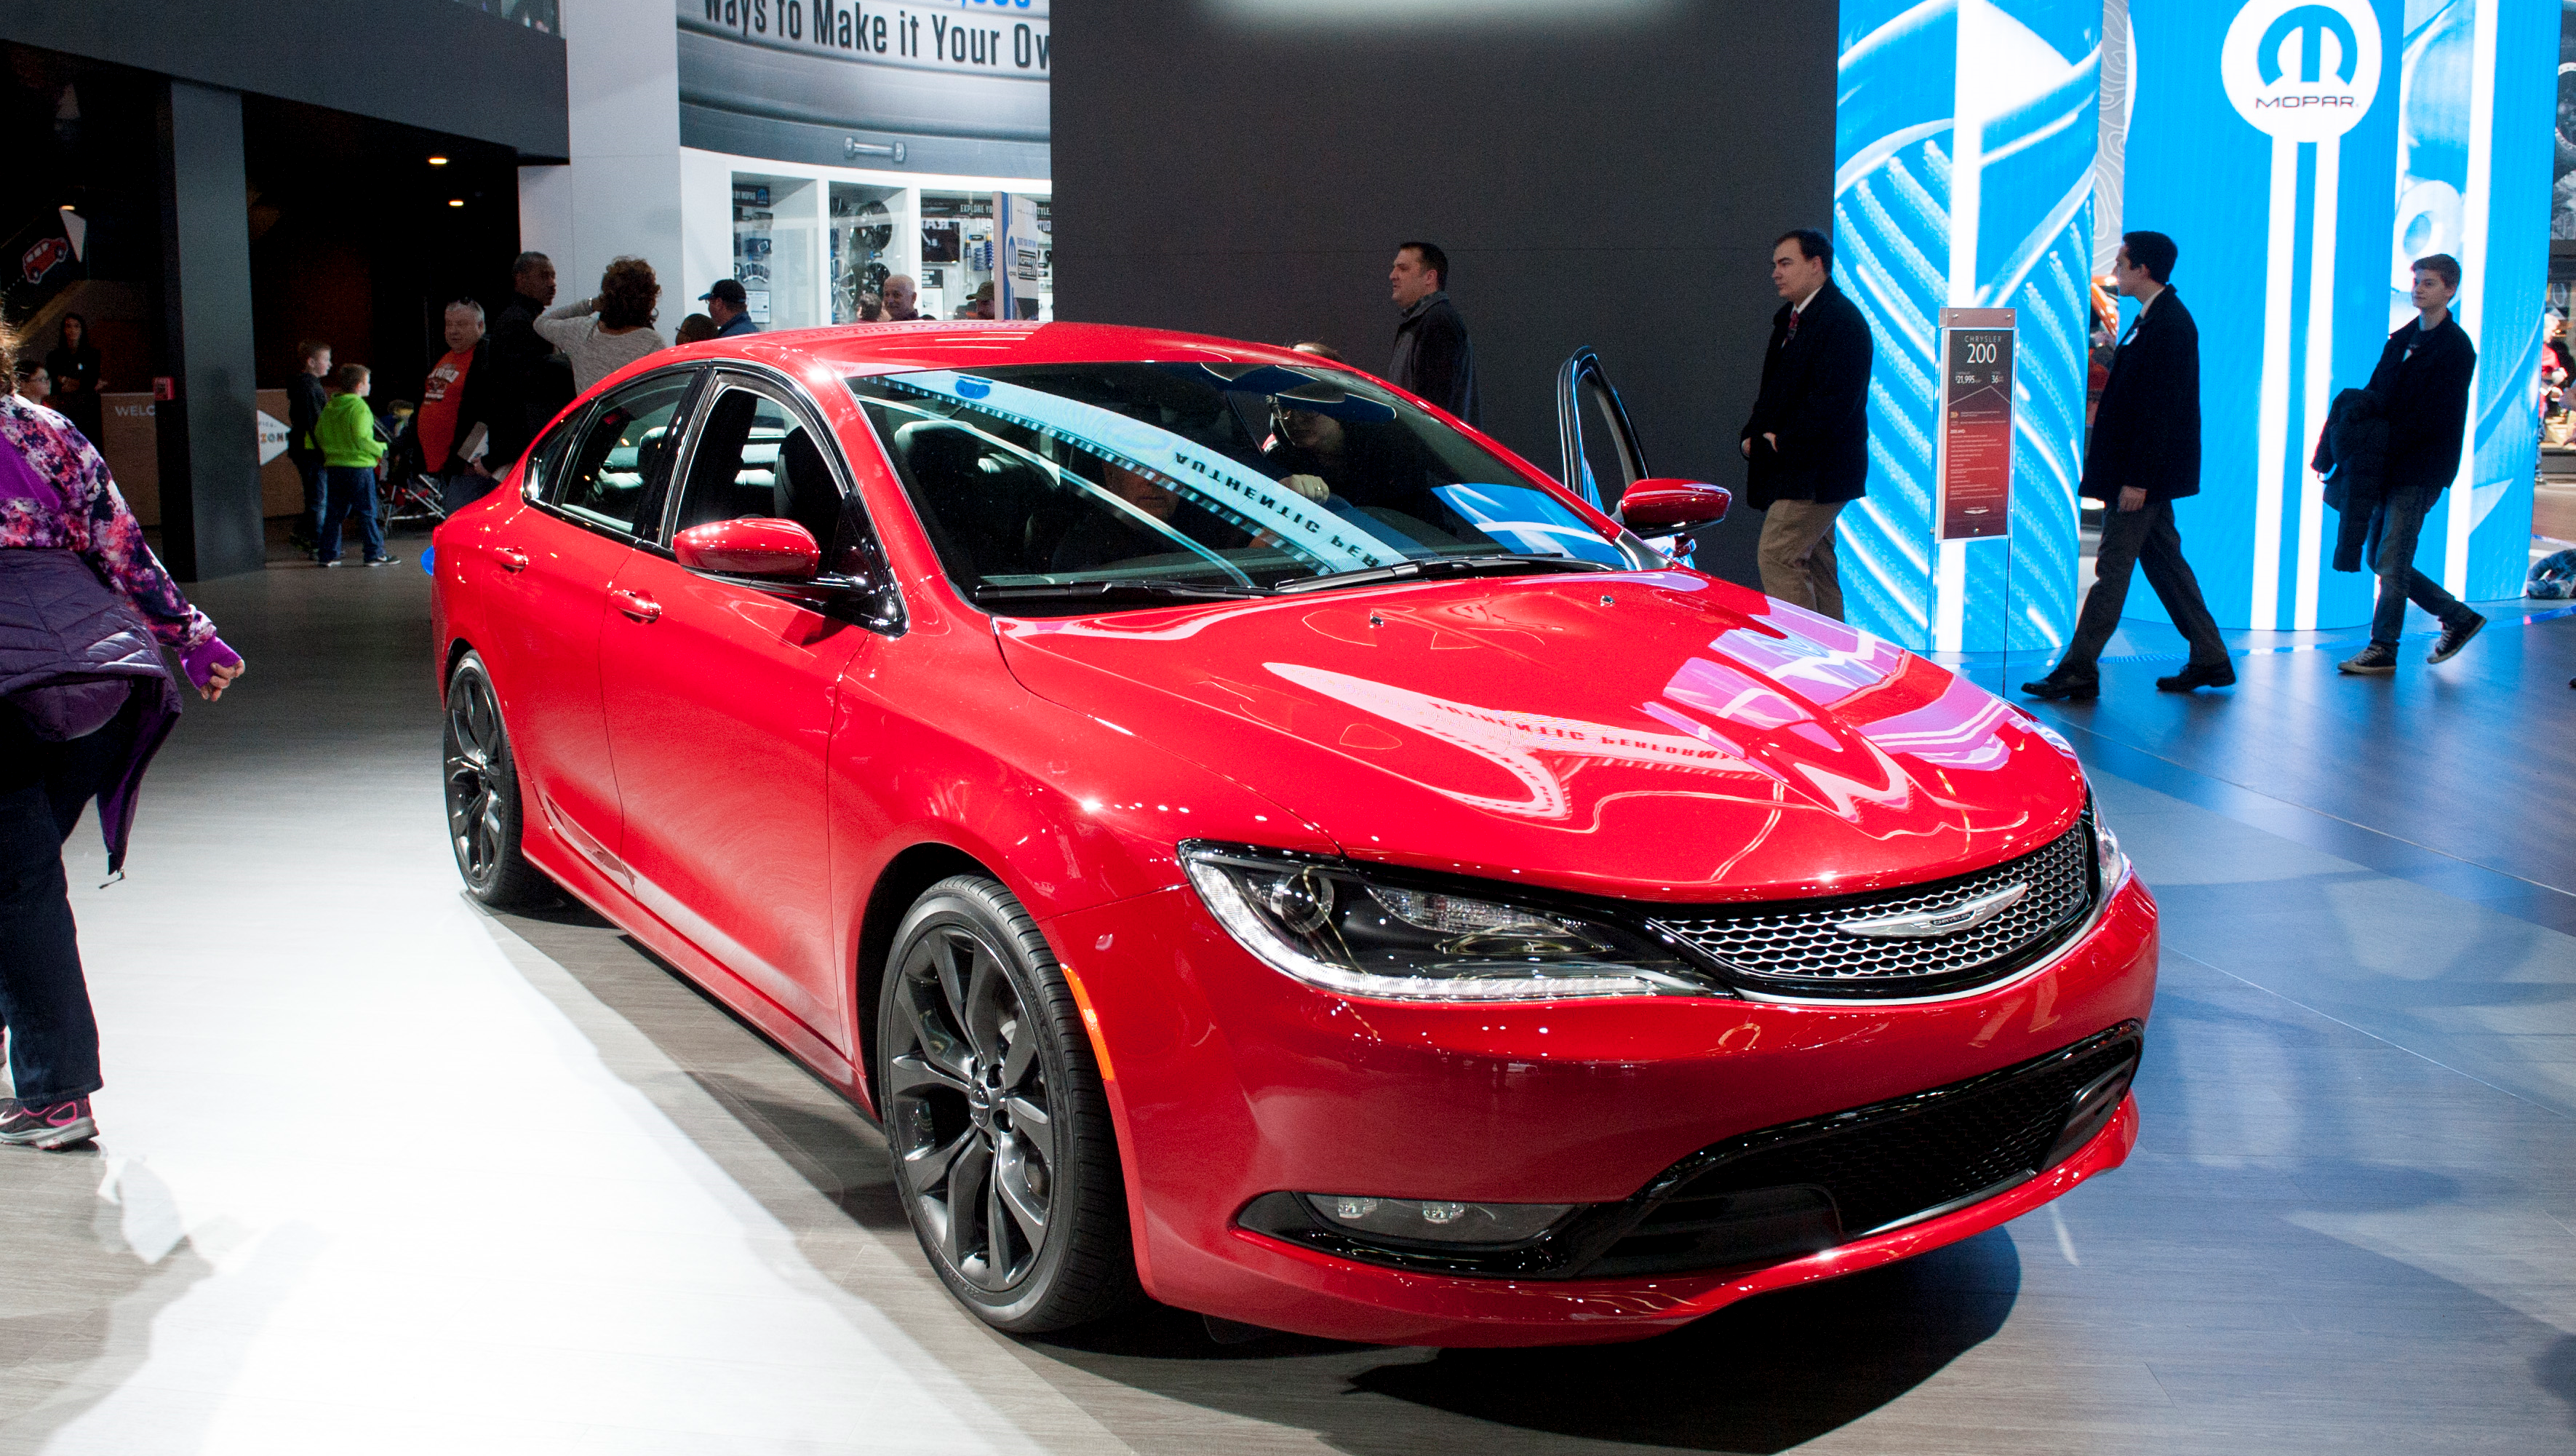 The Chrysler 200 displayed at the North American International Auto Show in Detroit on Jan. 18, 2016.